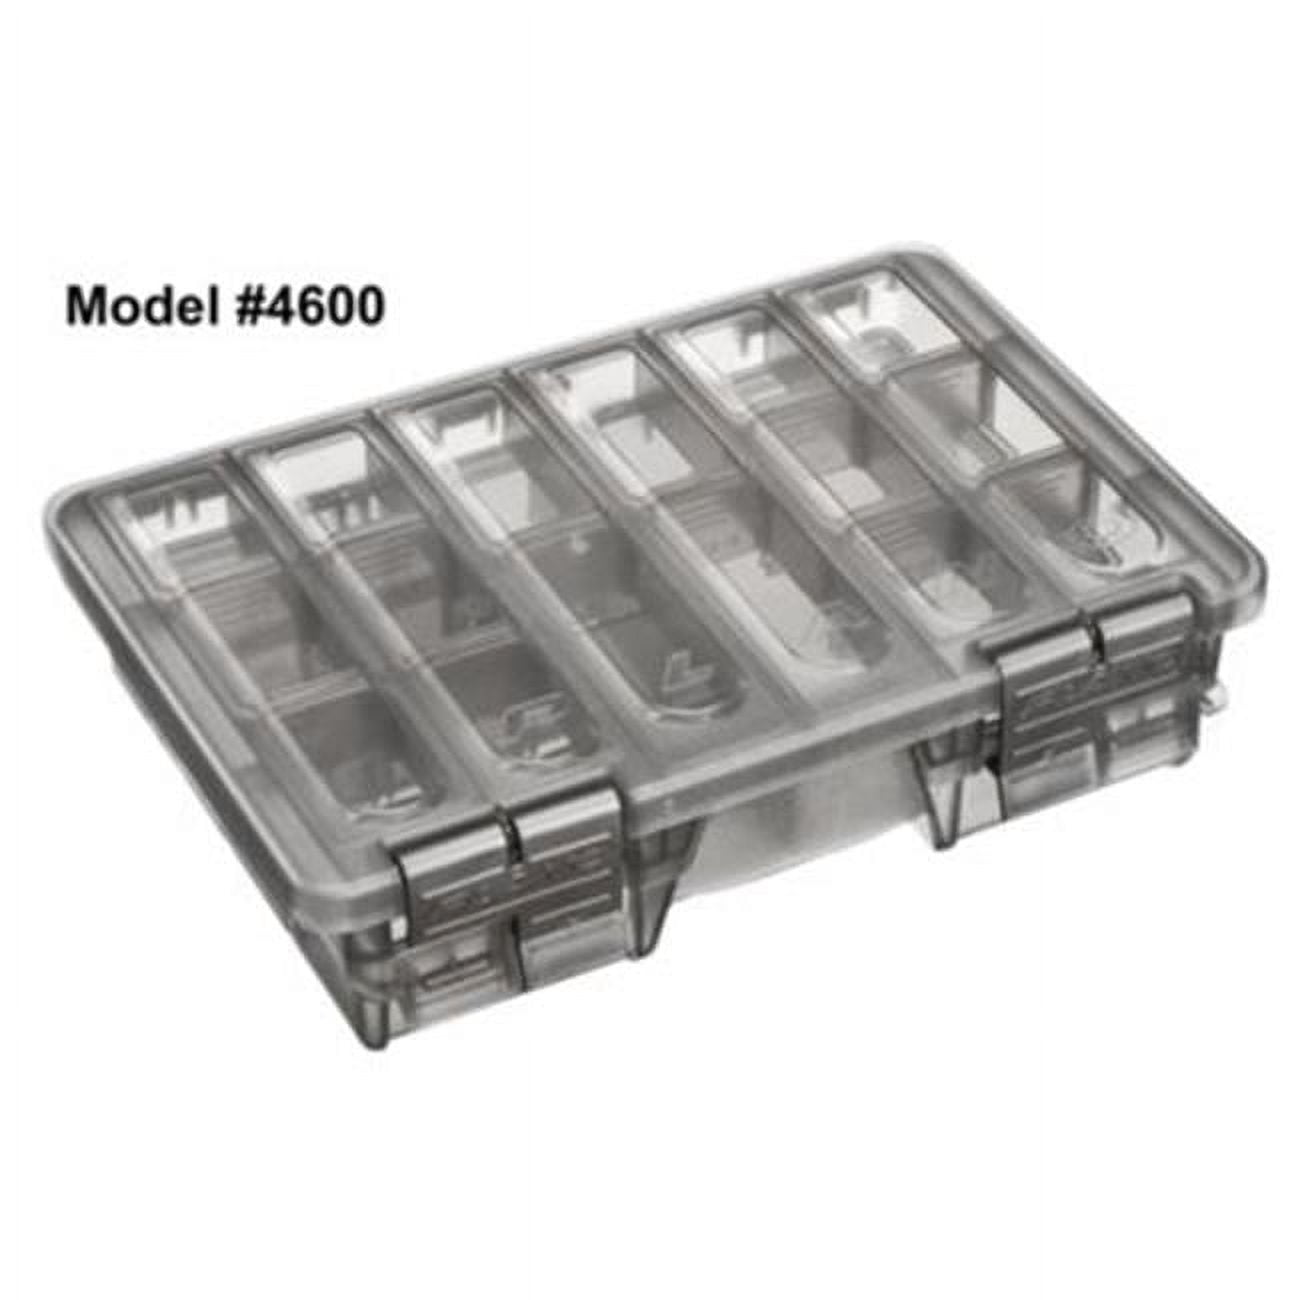 Ghosthorn Fishing Tackle Box, Waterproof 3600 Tackle Trays